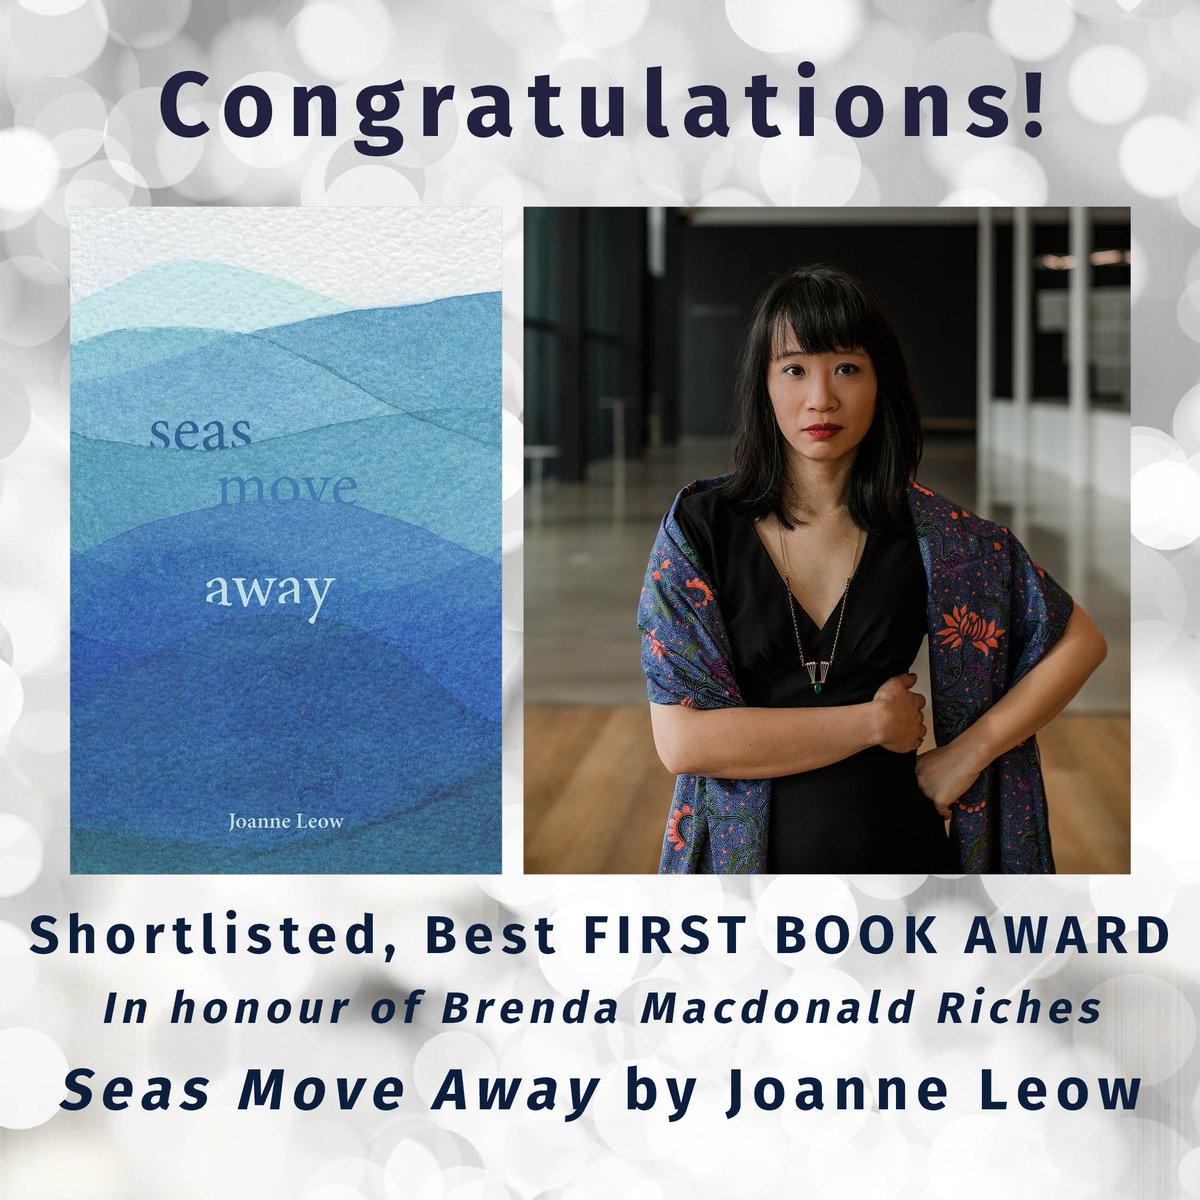 Congratulations to @joleow and her book SEAS MOVE AWAY, shortlisted for the Best First Book at the @SaskBookAwards. Winners will be announced May 4th. Congratulations to all the nominees! To learn more about the awards please visit their website at bookawards.sk.ca